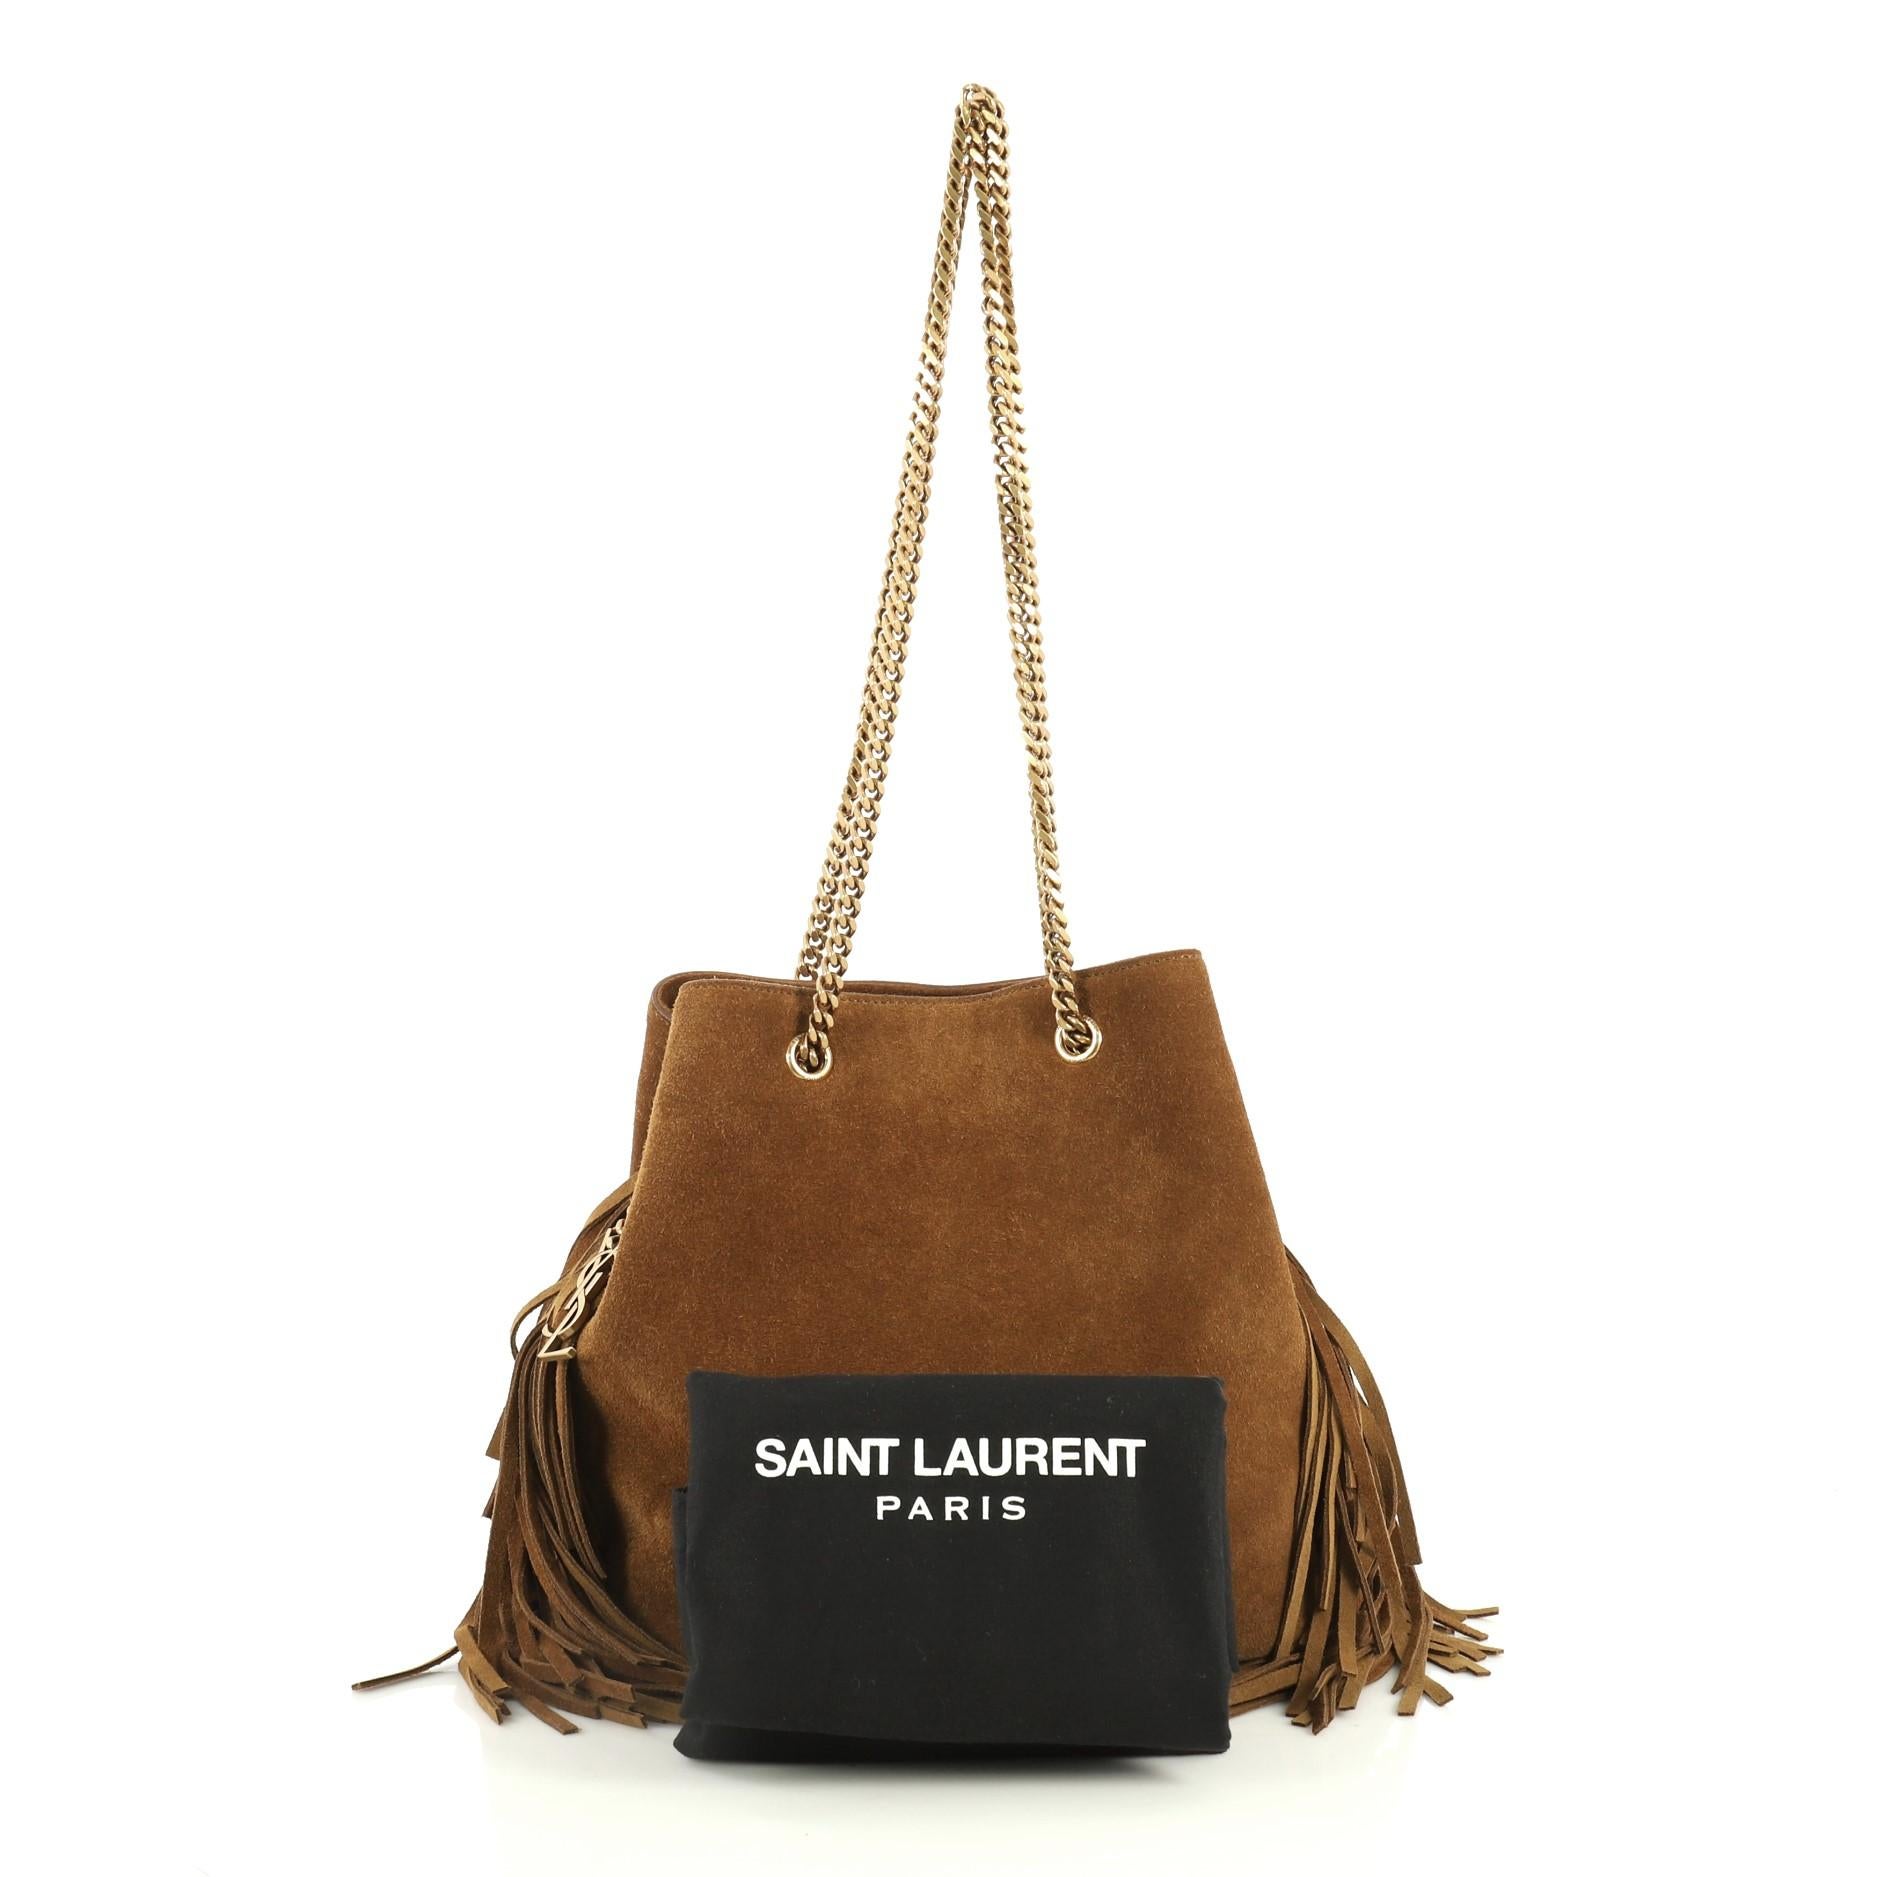 This Saint Laurent Emmanuelle Chain Bucket Bag Fringe Suede Small, crafted in brown suede, features chain-link handles, interlocking YSL metal charm and aged gold-tone hardware. It opens to a brown suede interior. 

Estimated Retail Price: